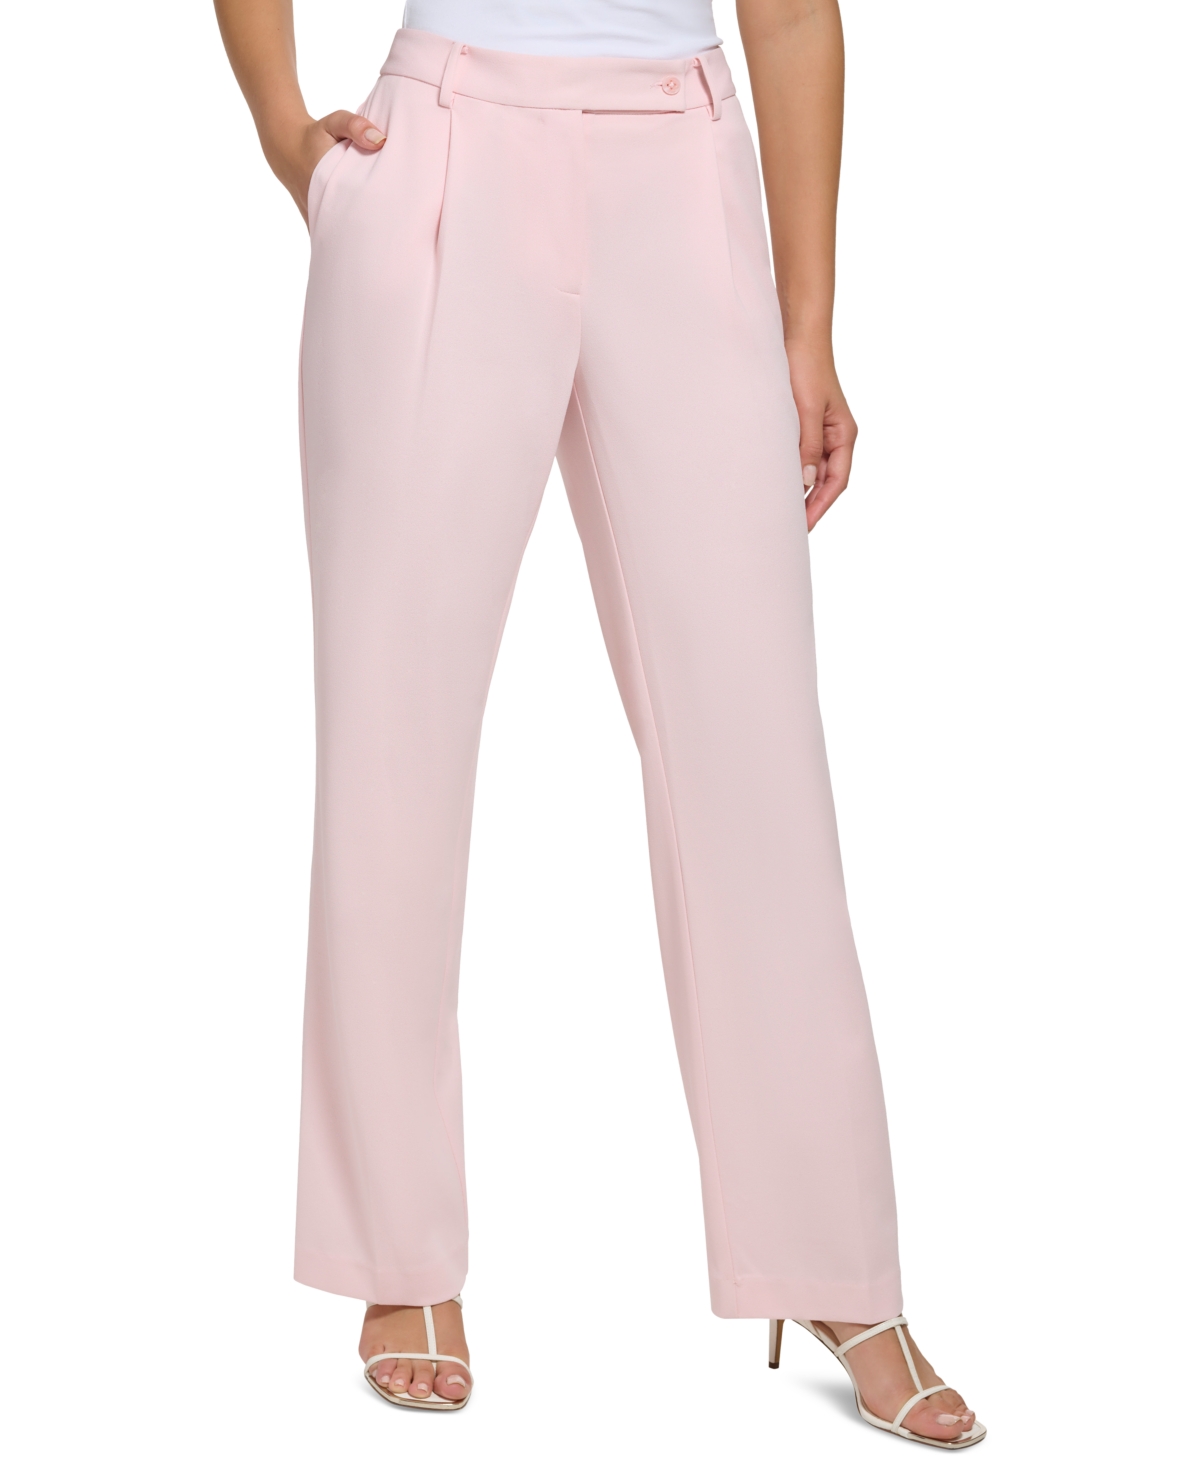 DKNY WOMEN'S SOLID EXTENDED-TAB PLEAT-FRONT WIDE-LEG PANTS